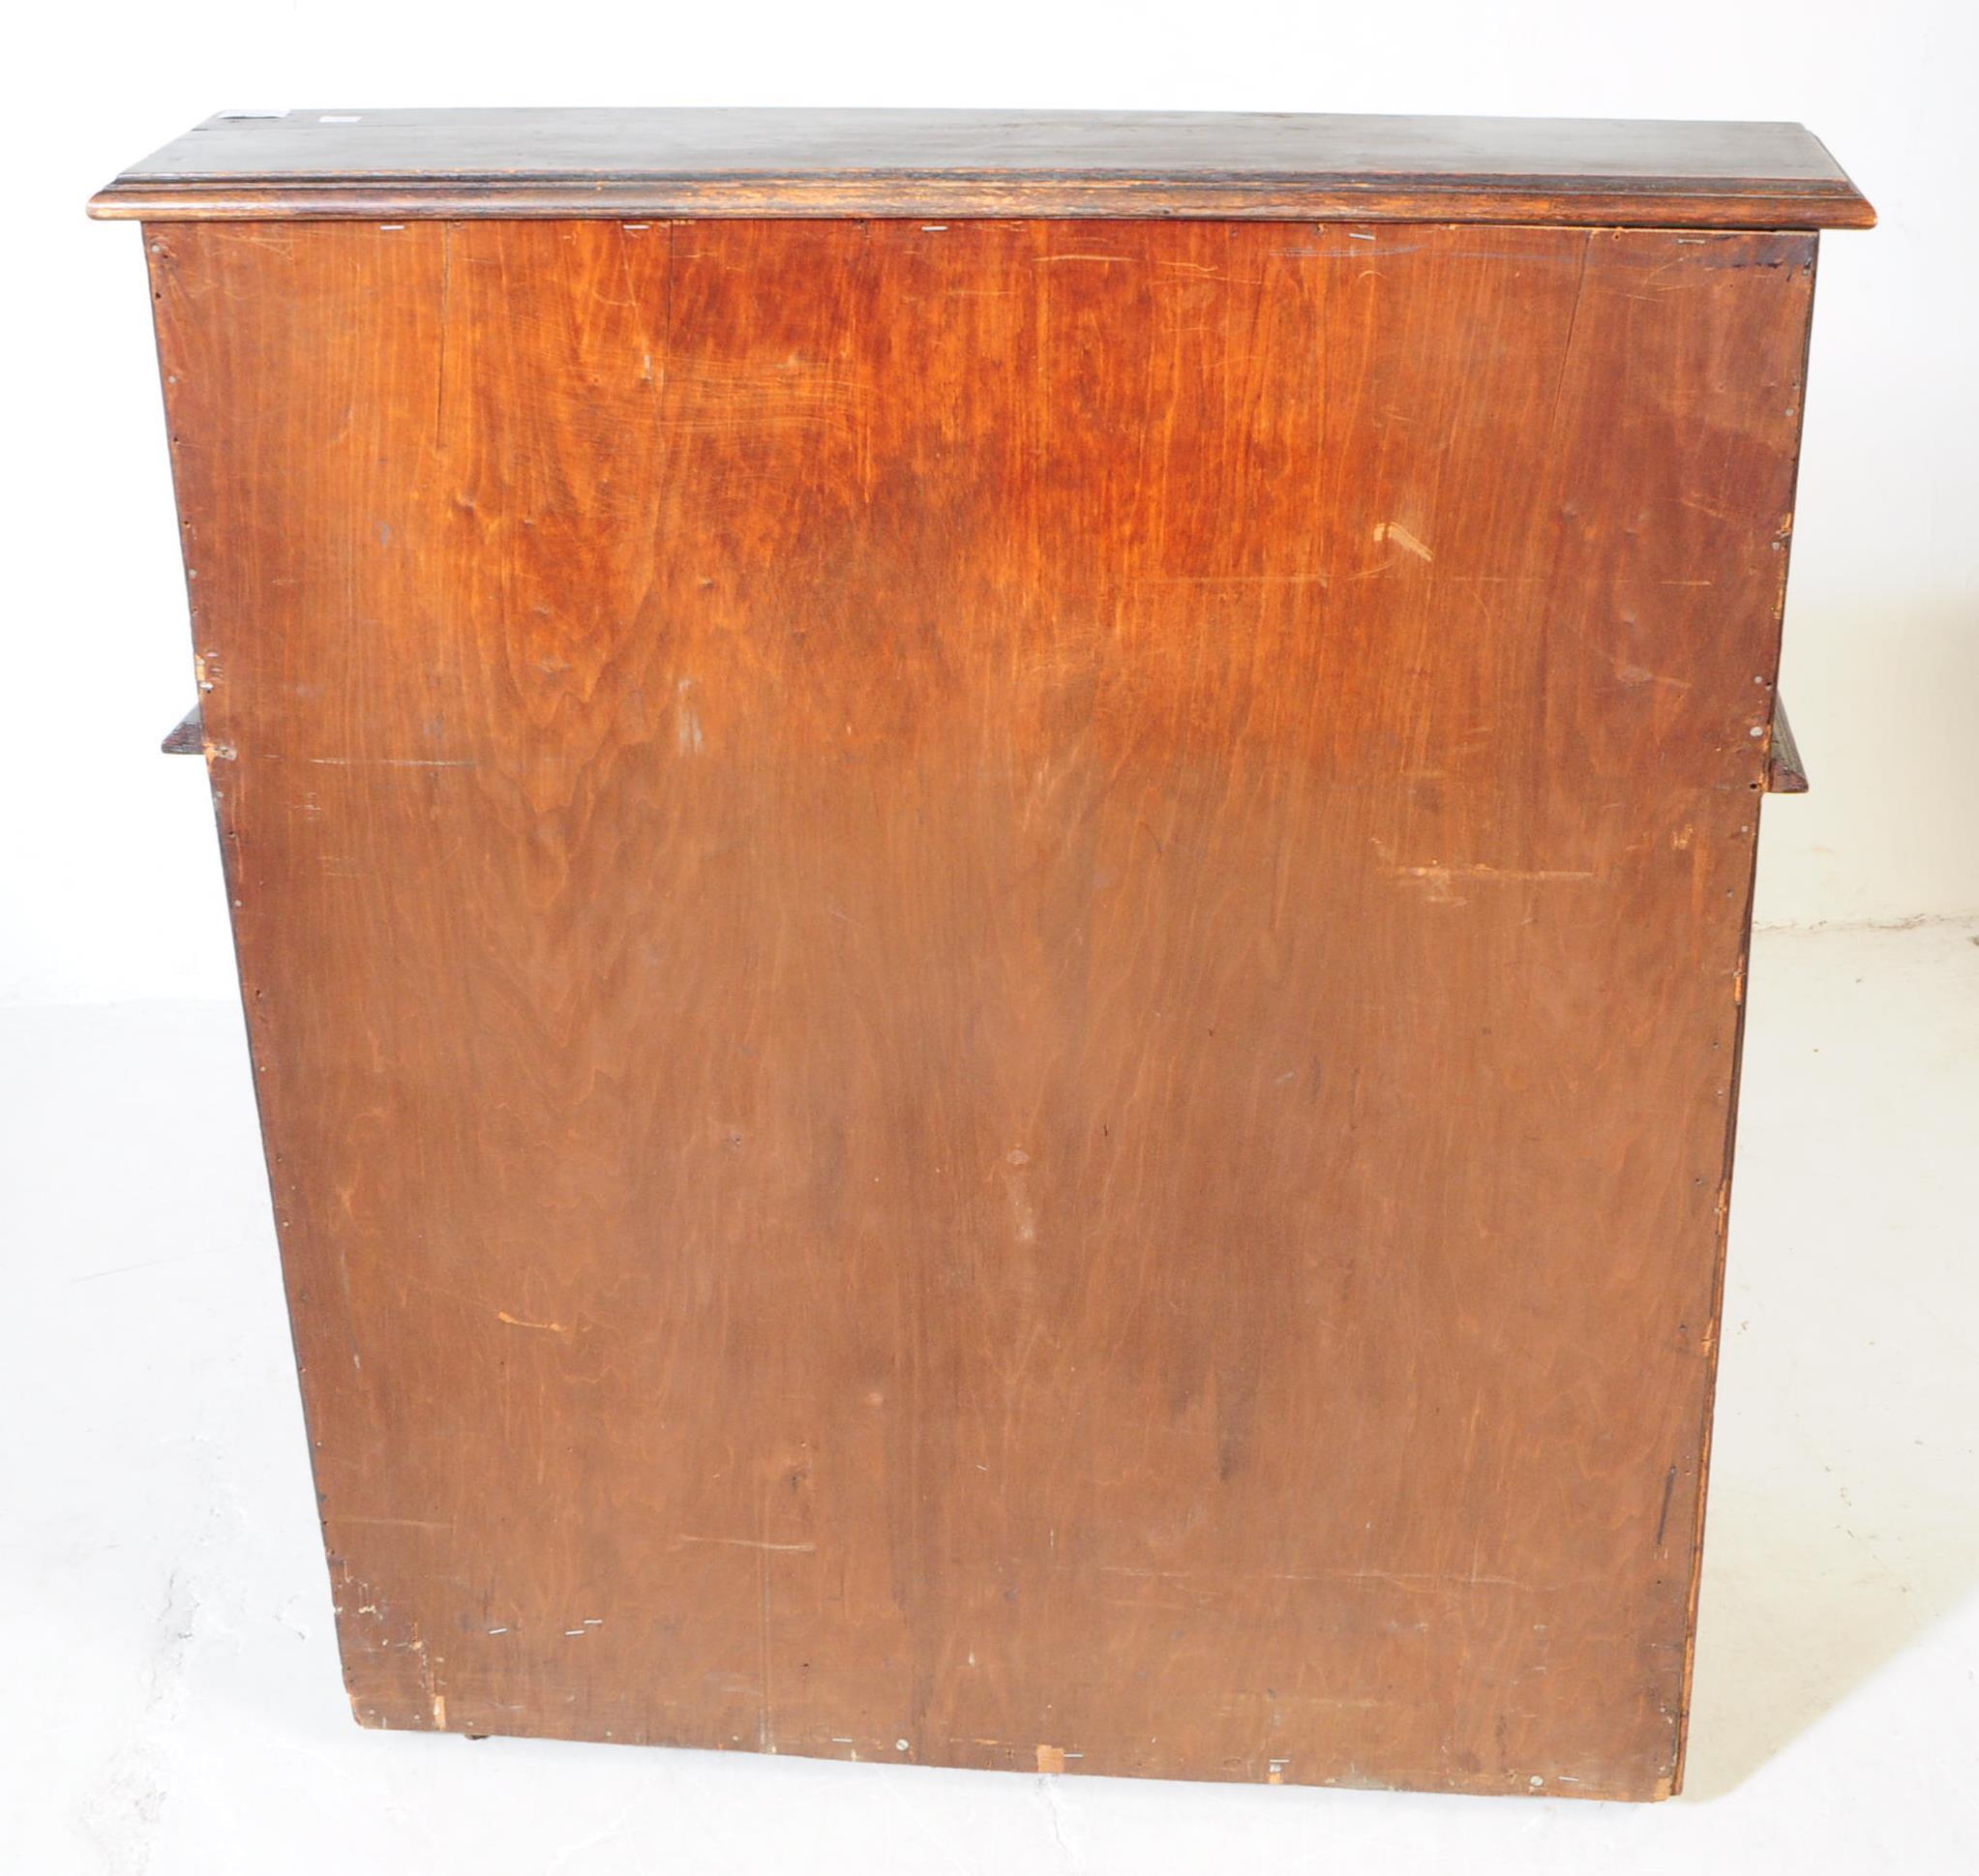 EARLY 20TH CENTURY MAHOGANY ROLL TOP DESK - Image 7 of 7